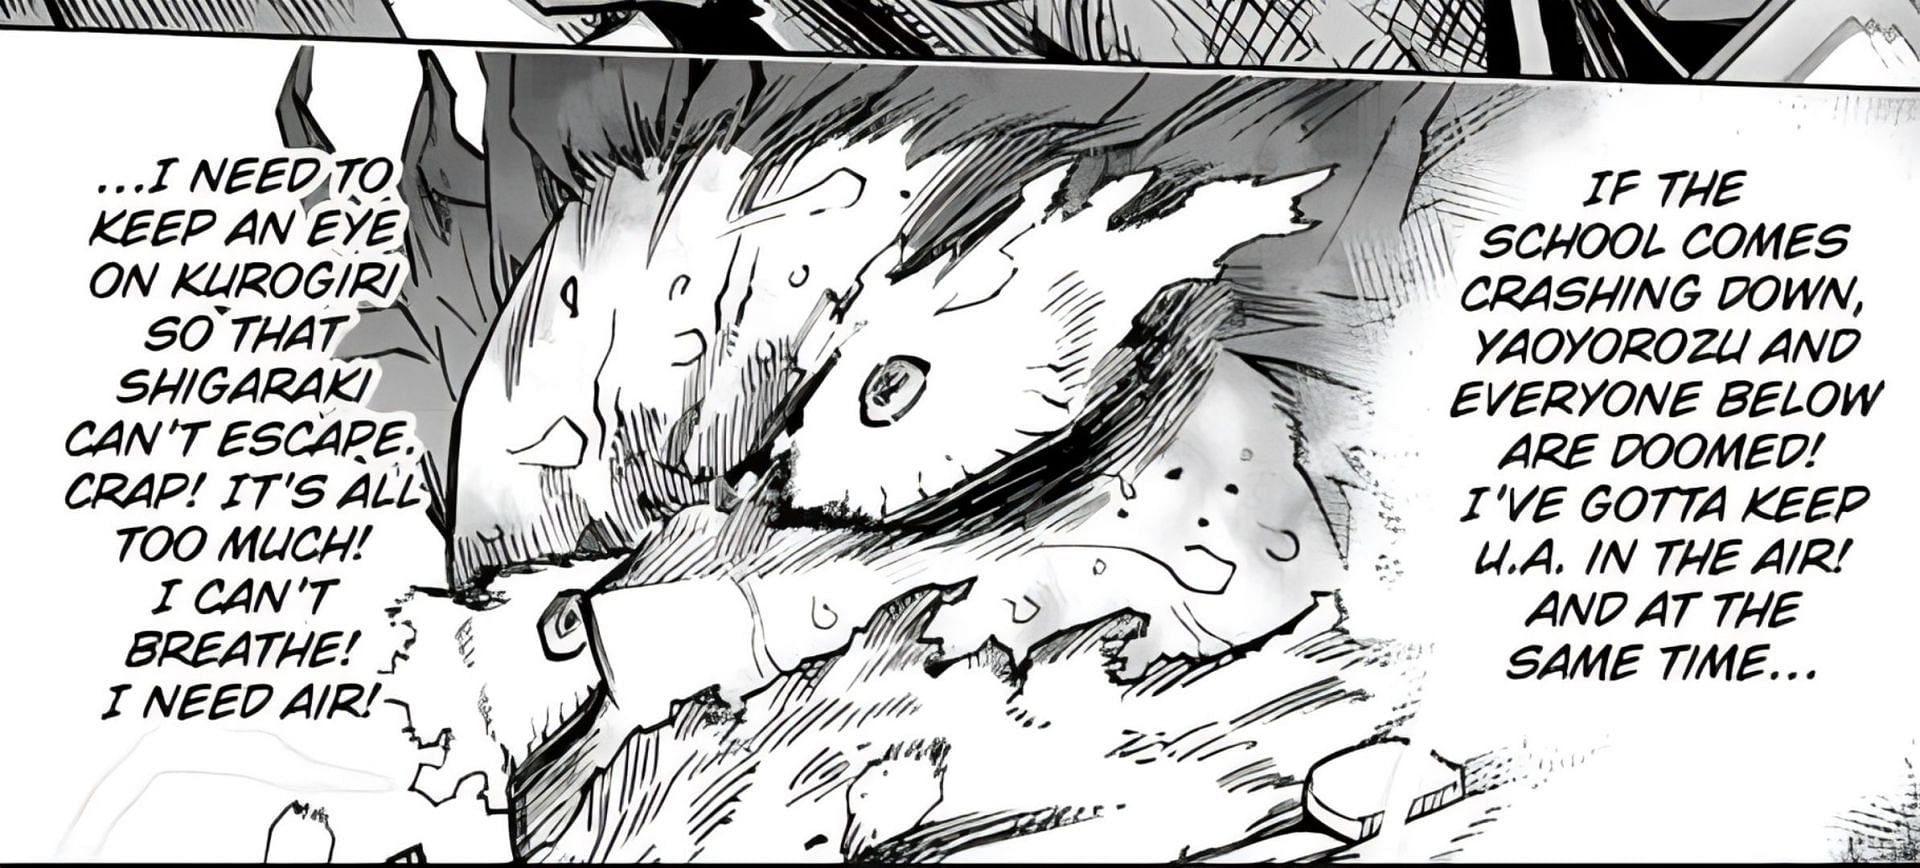 My Hero Academia chapter 377: Shigaraki unleashed, Deku at his limit, a  former villain returns to help the heroes